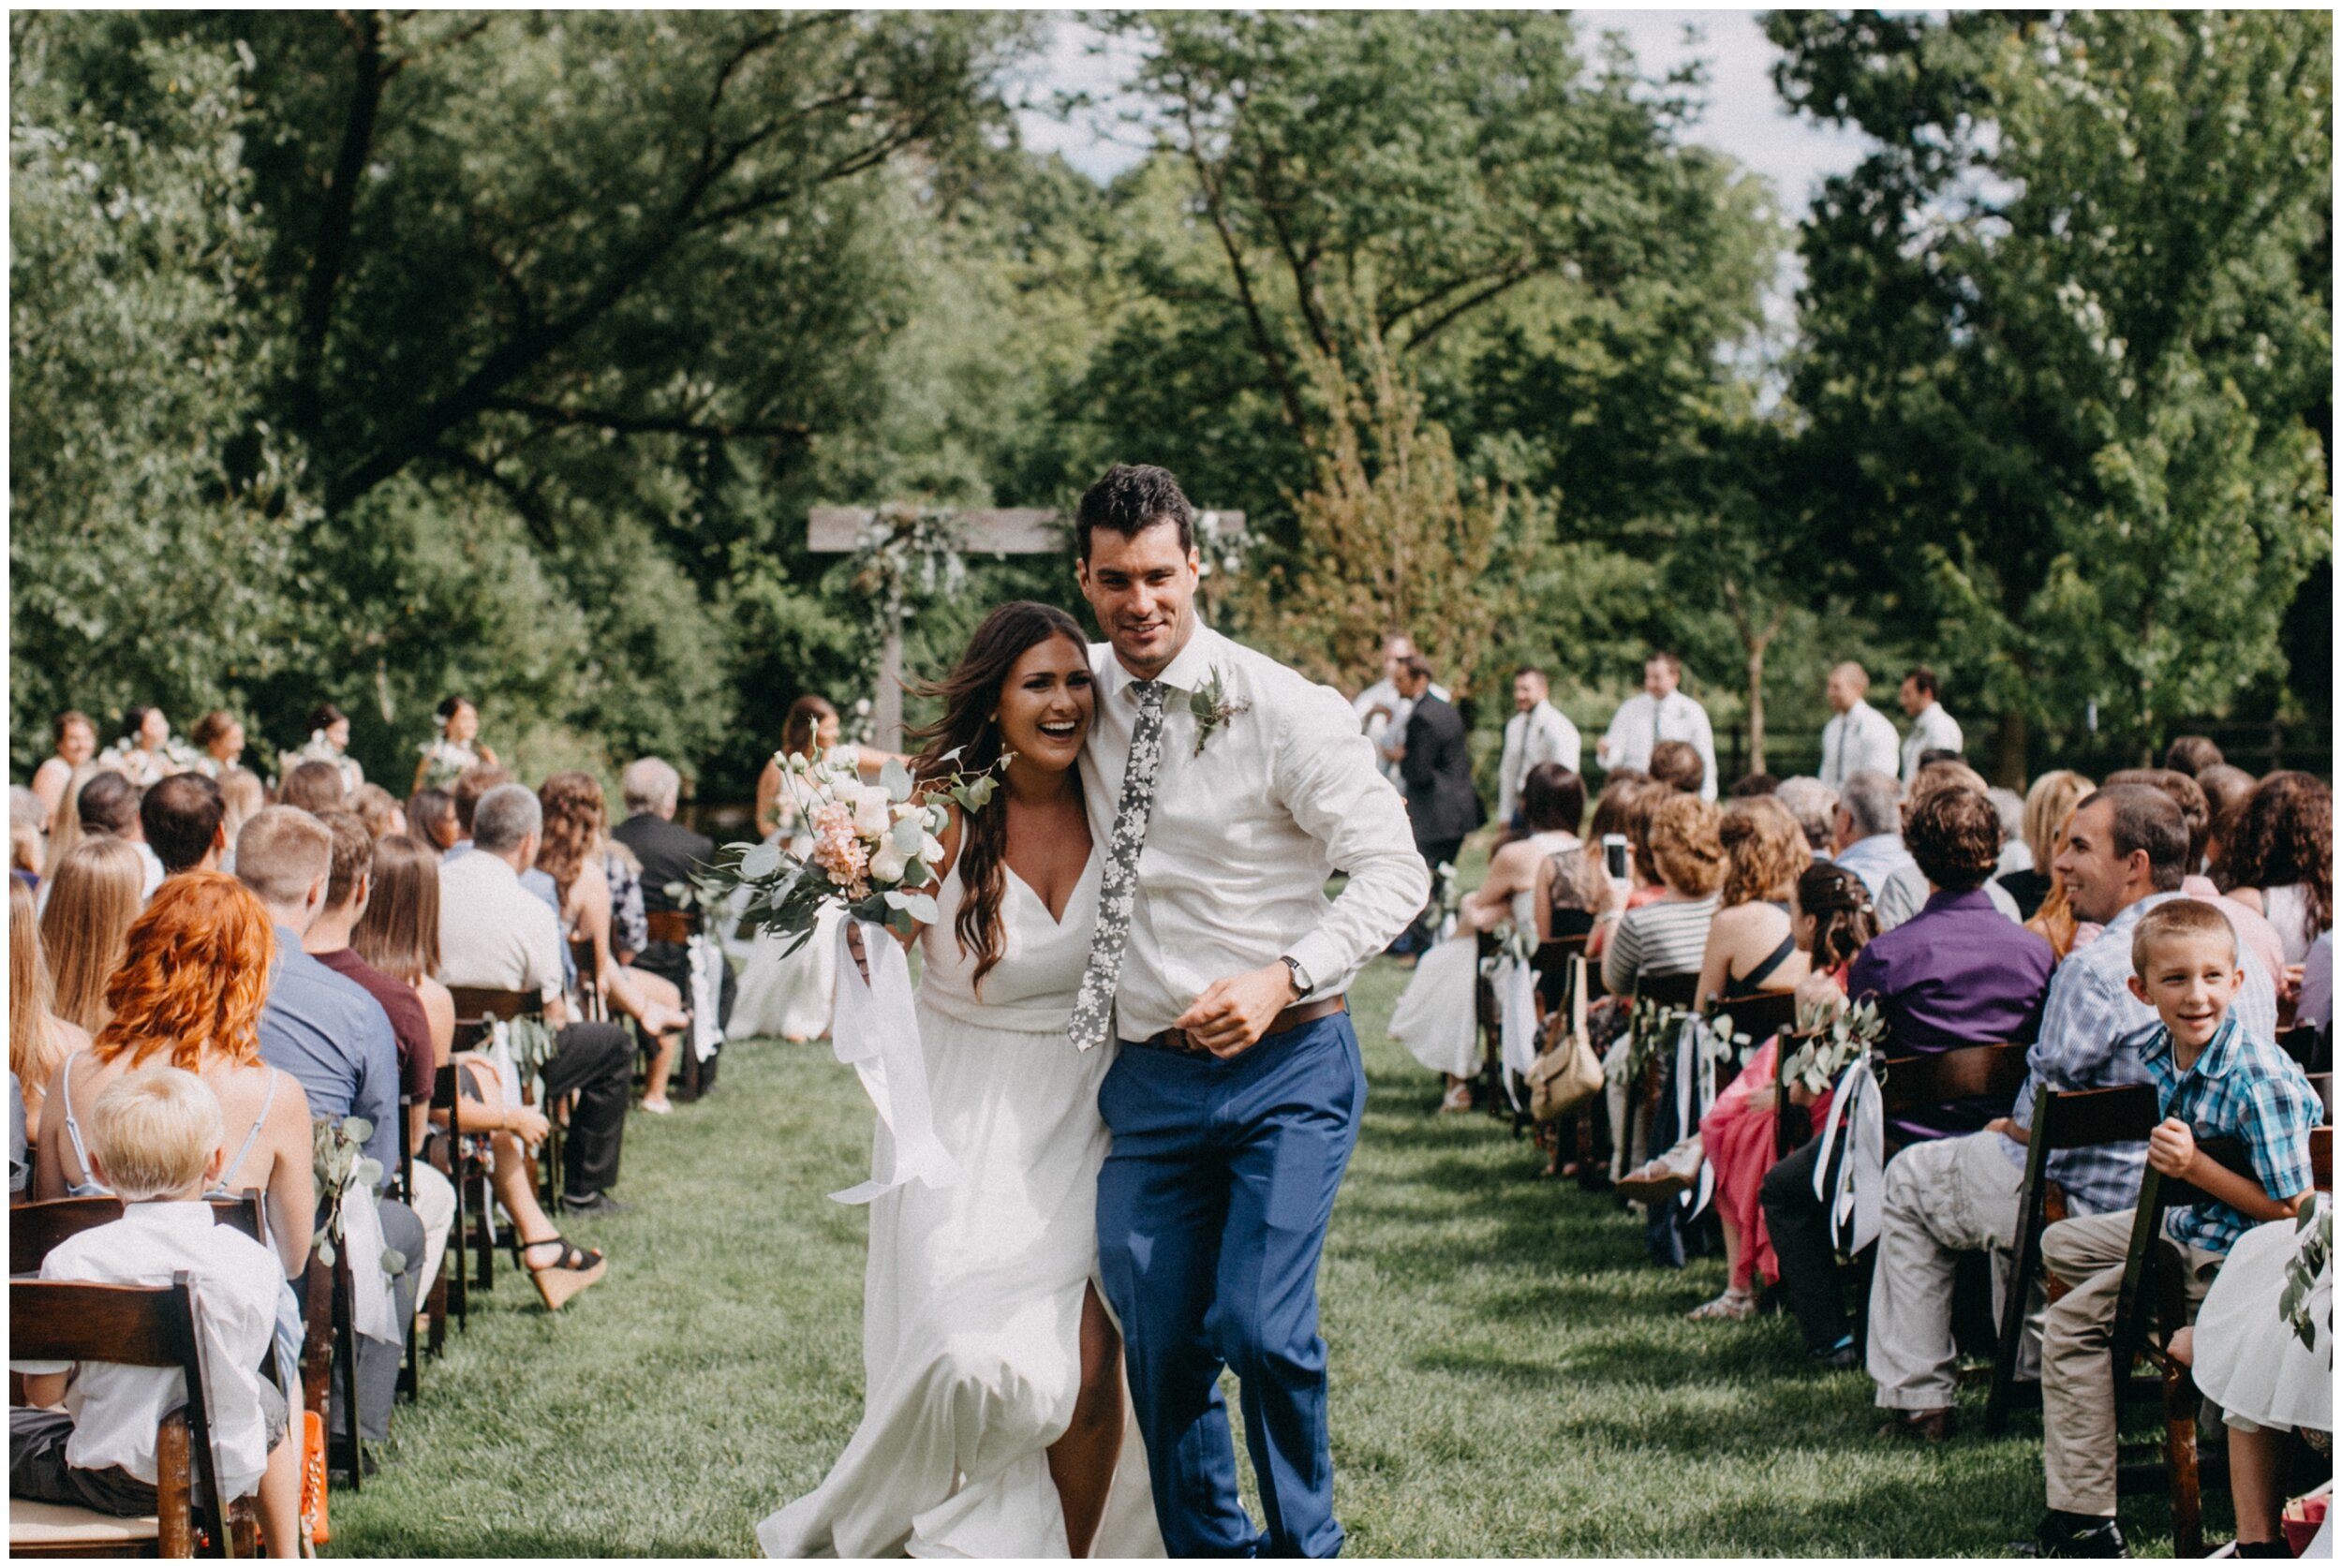 Bridesmaid and groomsman excitedly walk down aisle after outdoor barn wedding ceremony in Minnesota